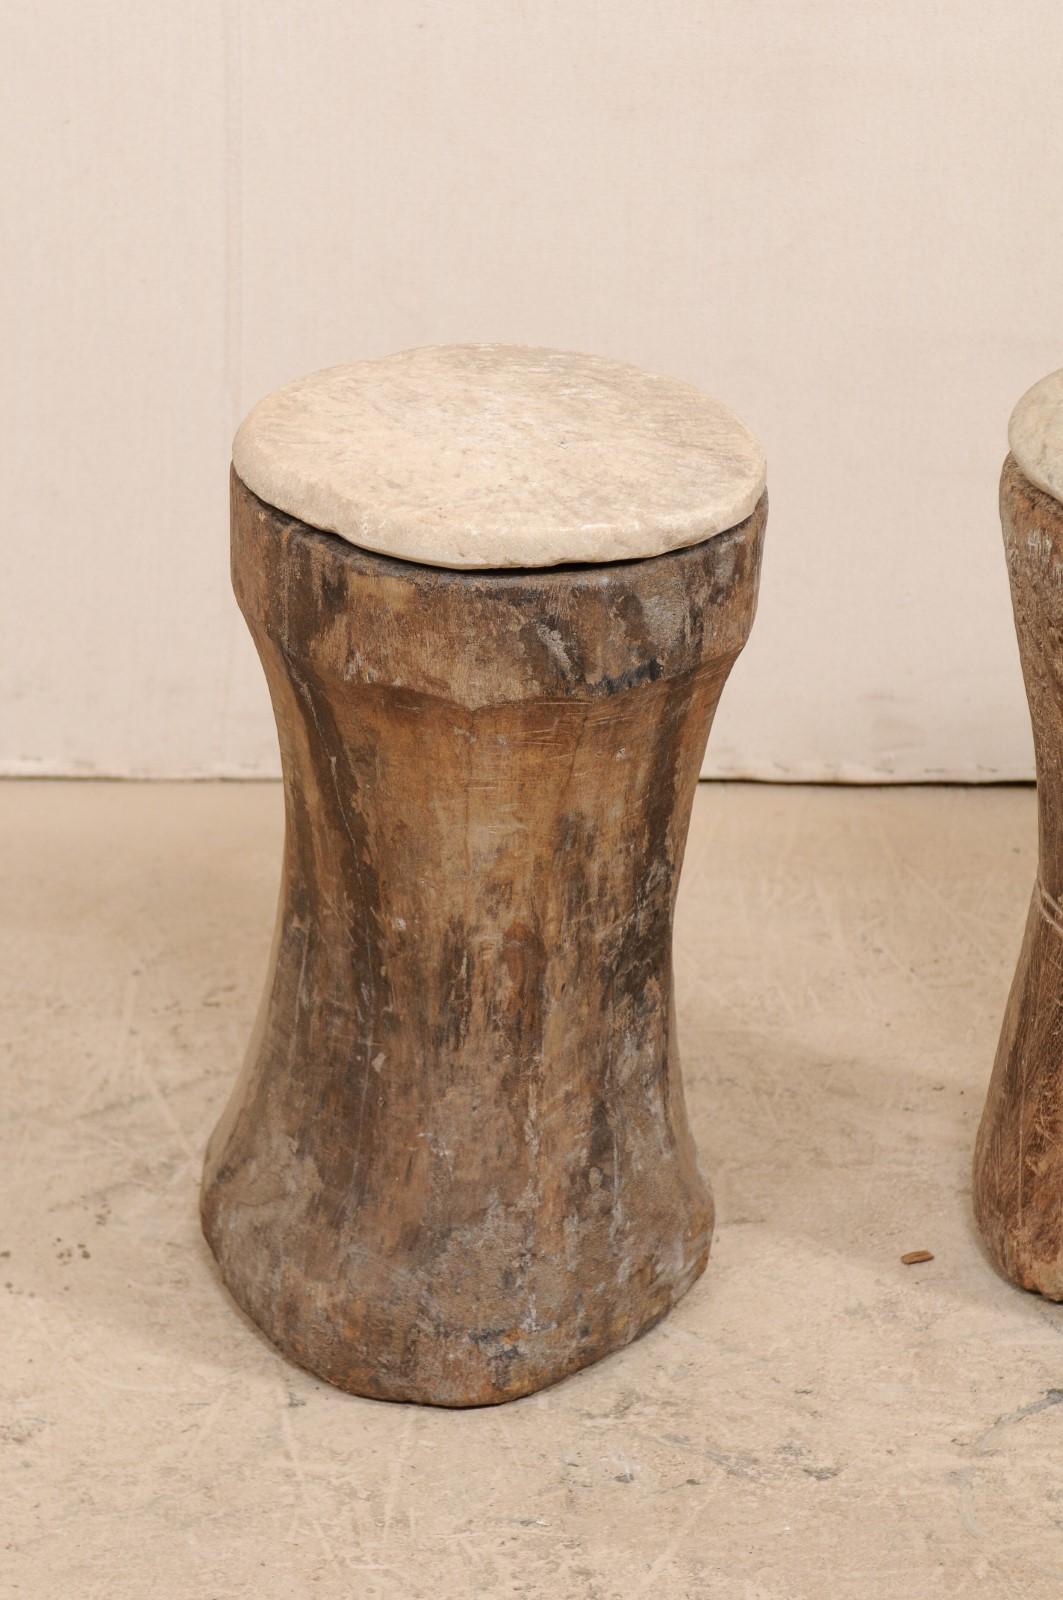 Hand-Carved Pair of 19th Century Rustic Wood Mortar Side Tables with Antique Stone Tops